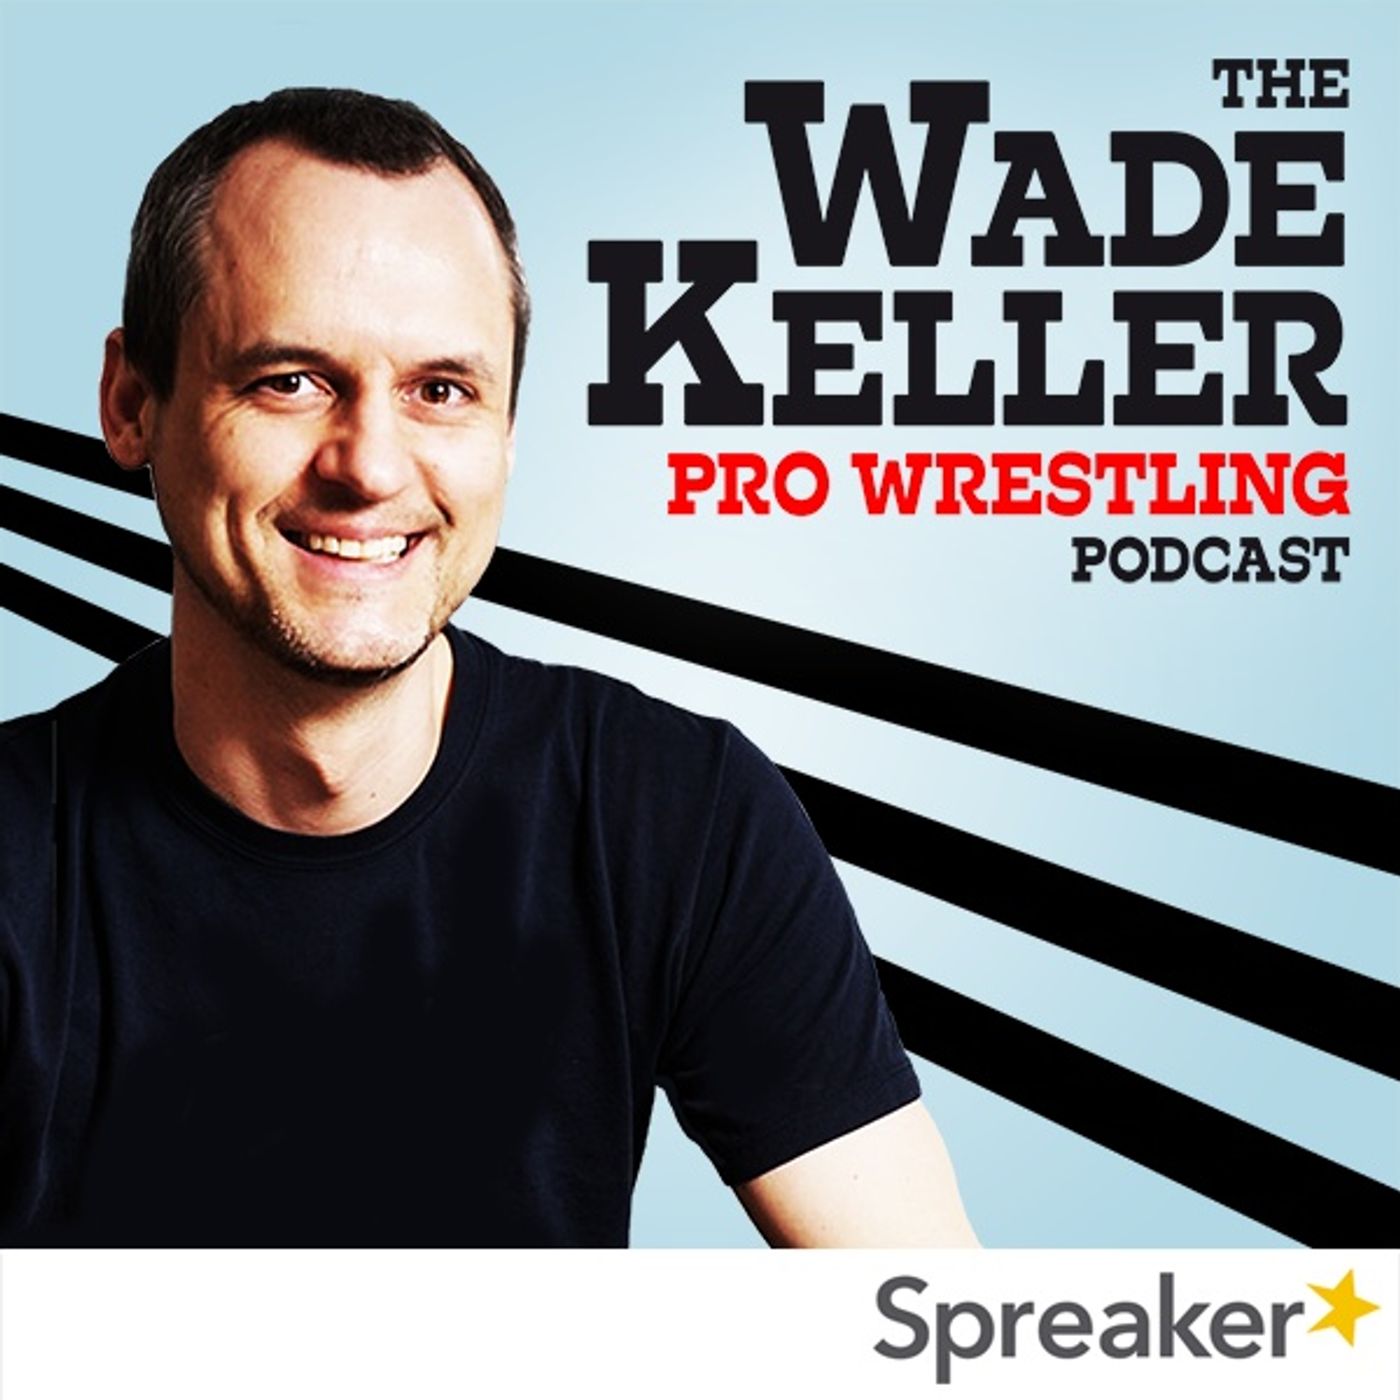 WKPWP - Mailbag Friday - Keller & Powell talk Moxley, Lesnar bait & switch, WWE alternative weekly shows, Aleister Black, Aries (6-7-19)